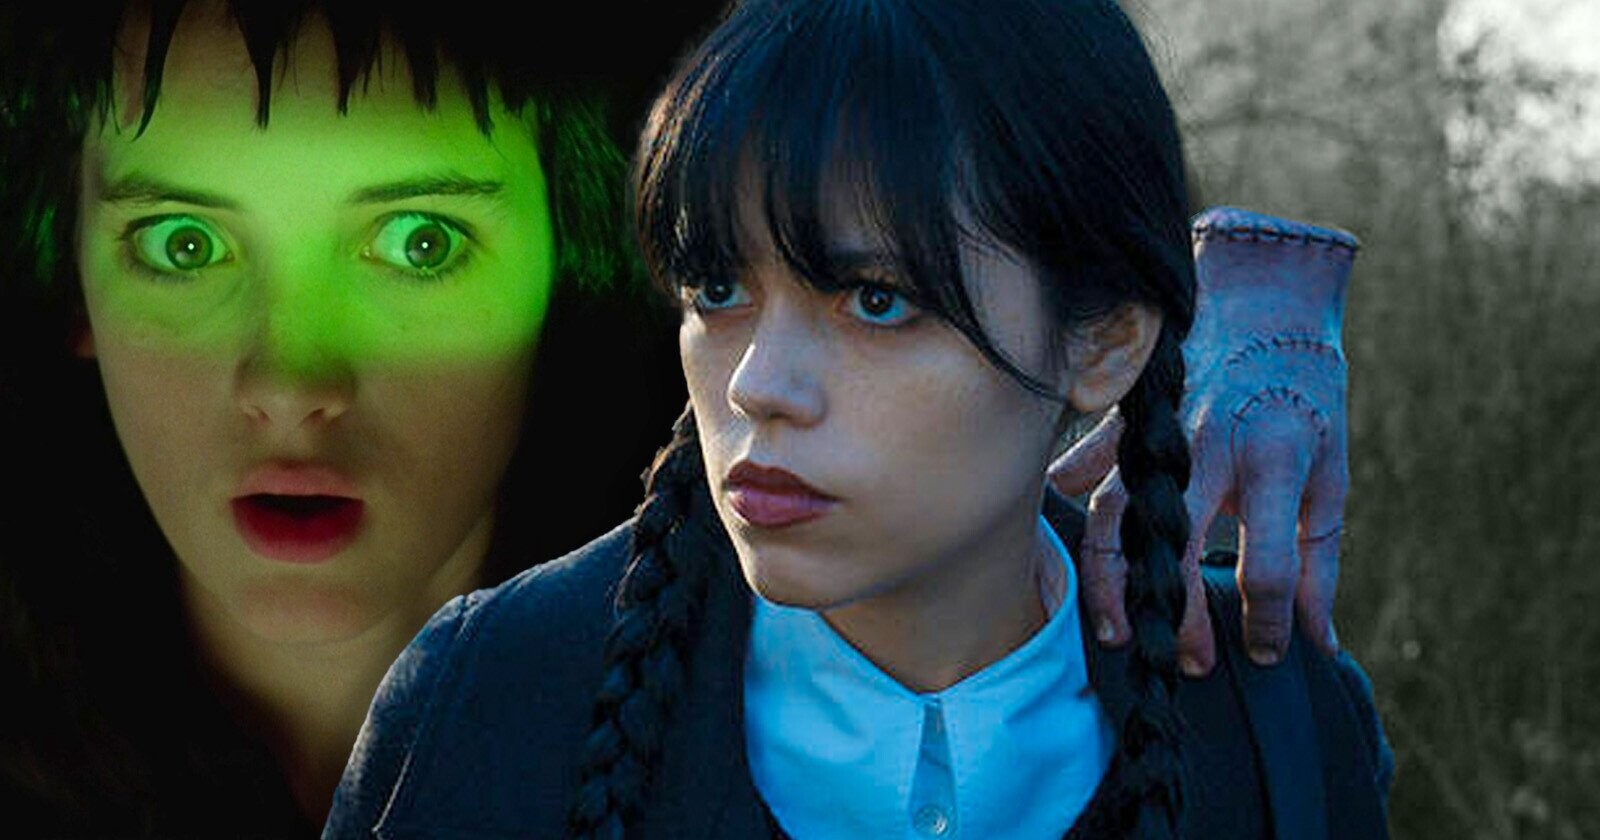 The ‘Wednesday’ Writers That Jenna Ortega Dissed Are Writing Her New ‘Beetlejuice’ Movie